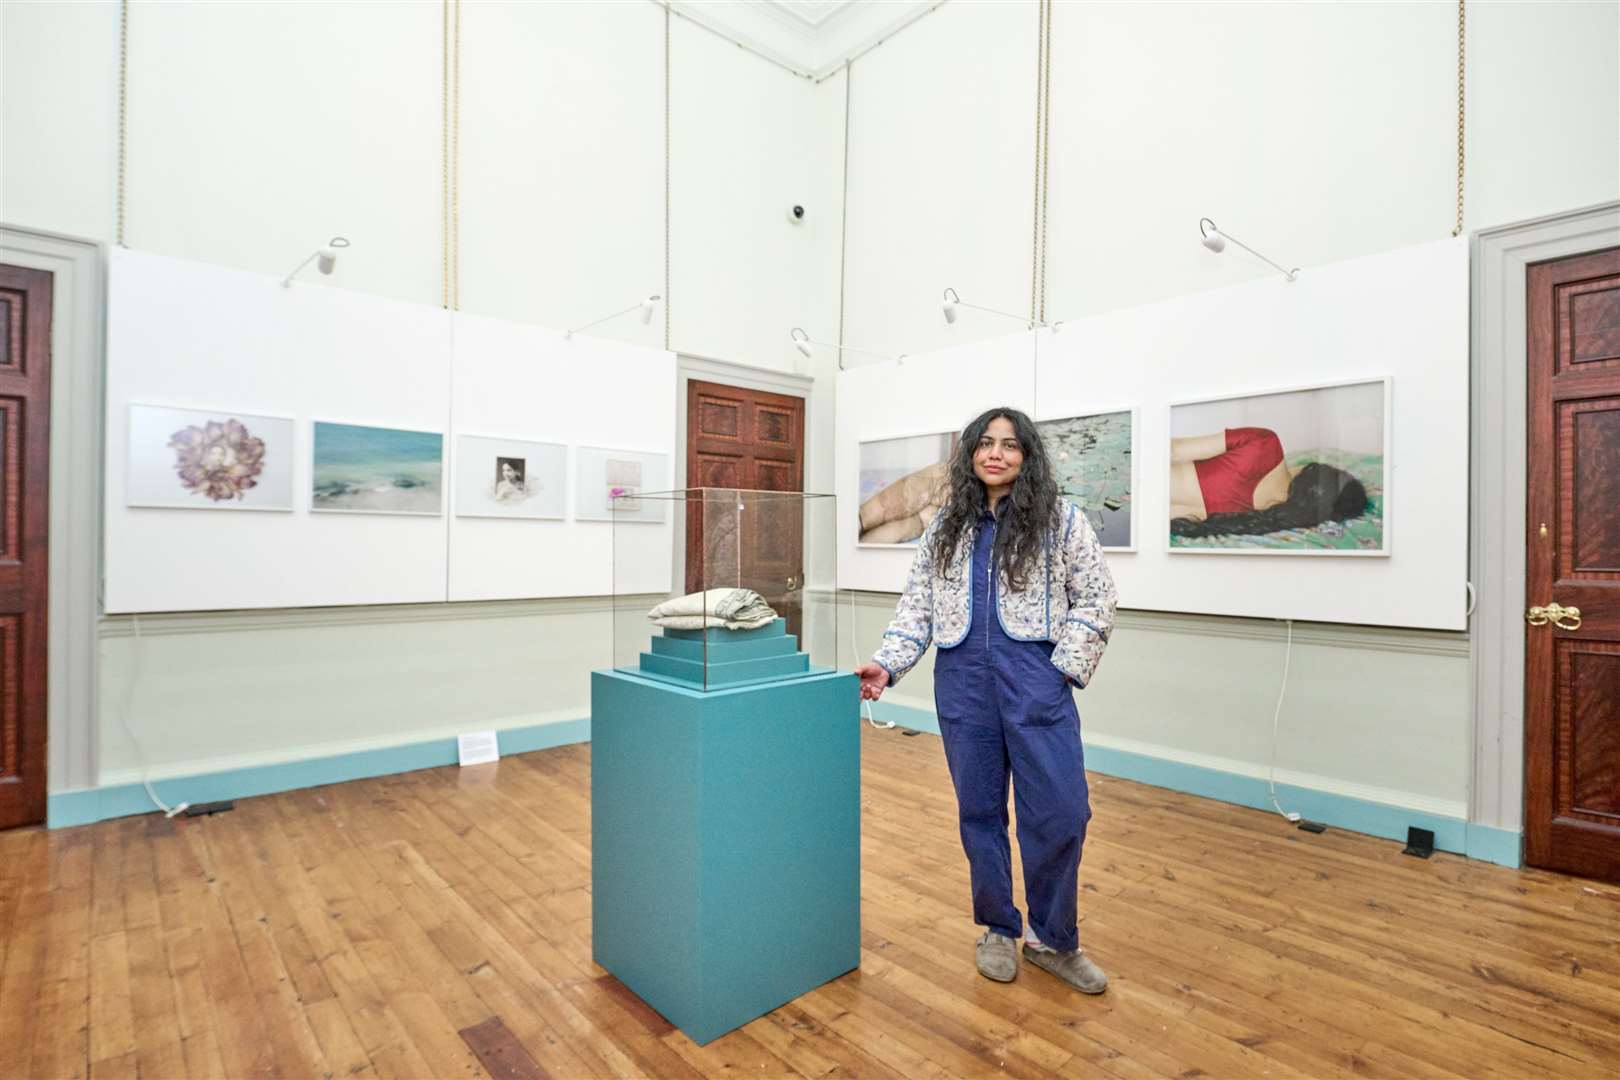 New Duff House exhibition Nalini explores the connected histories of Arpita Shah, her mother and her grandmother, spanning India, East Africa and the UK.